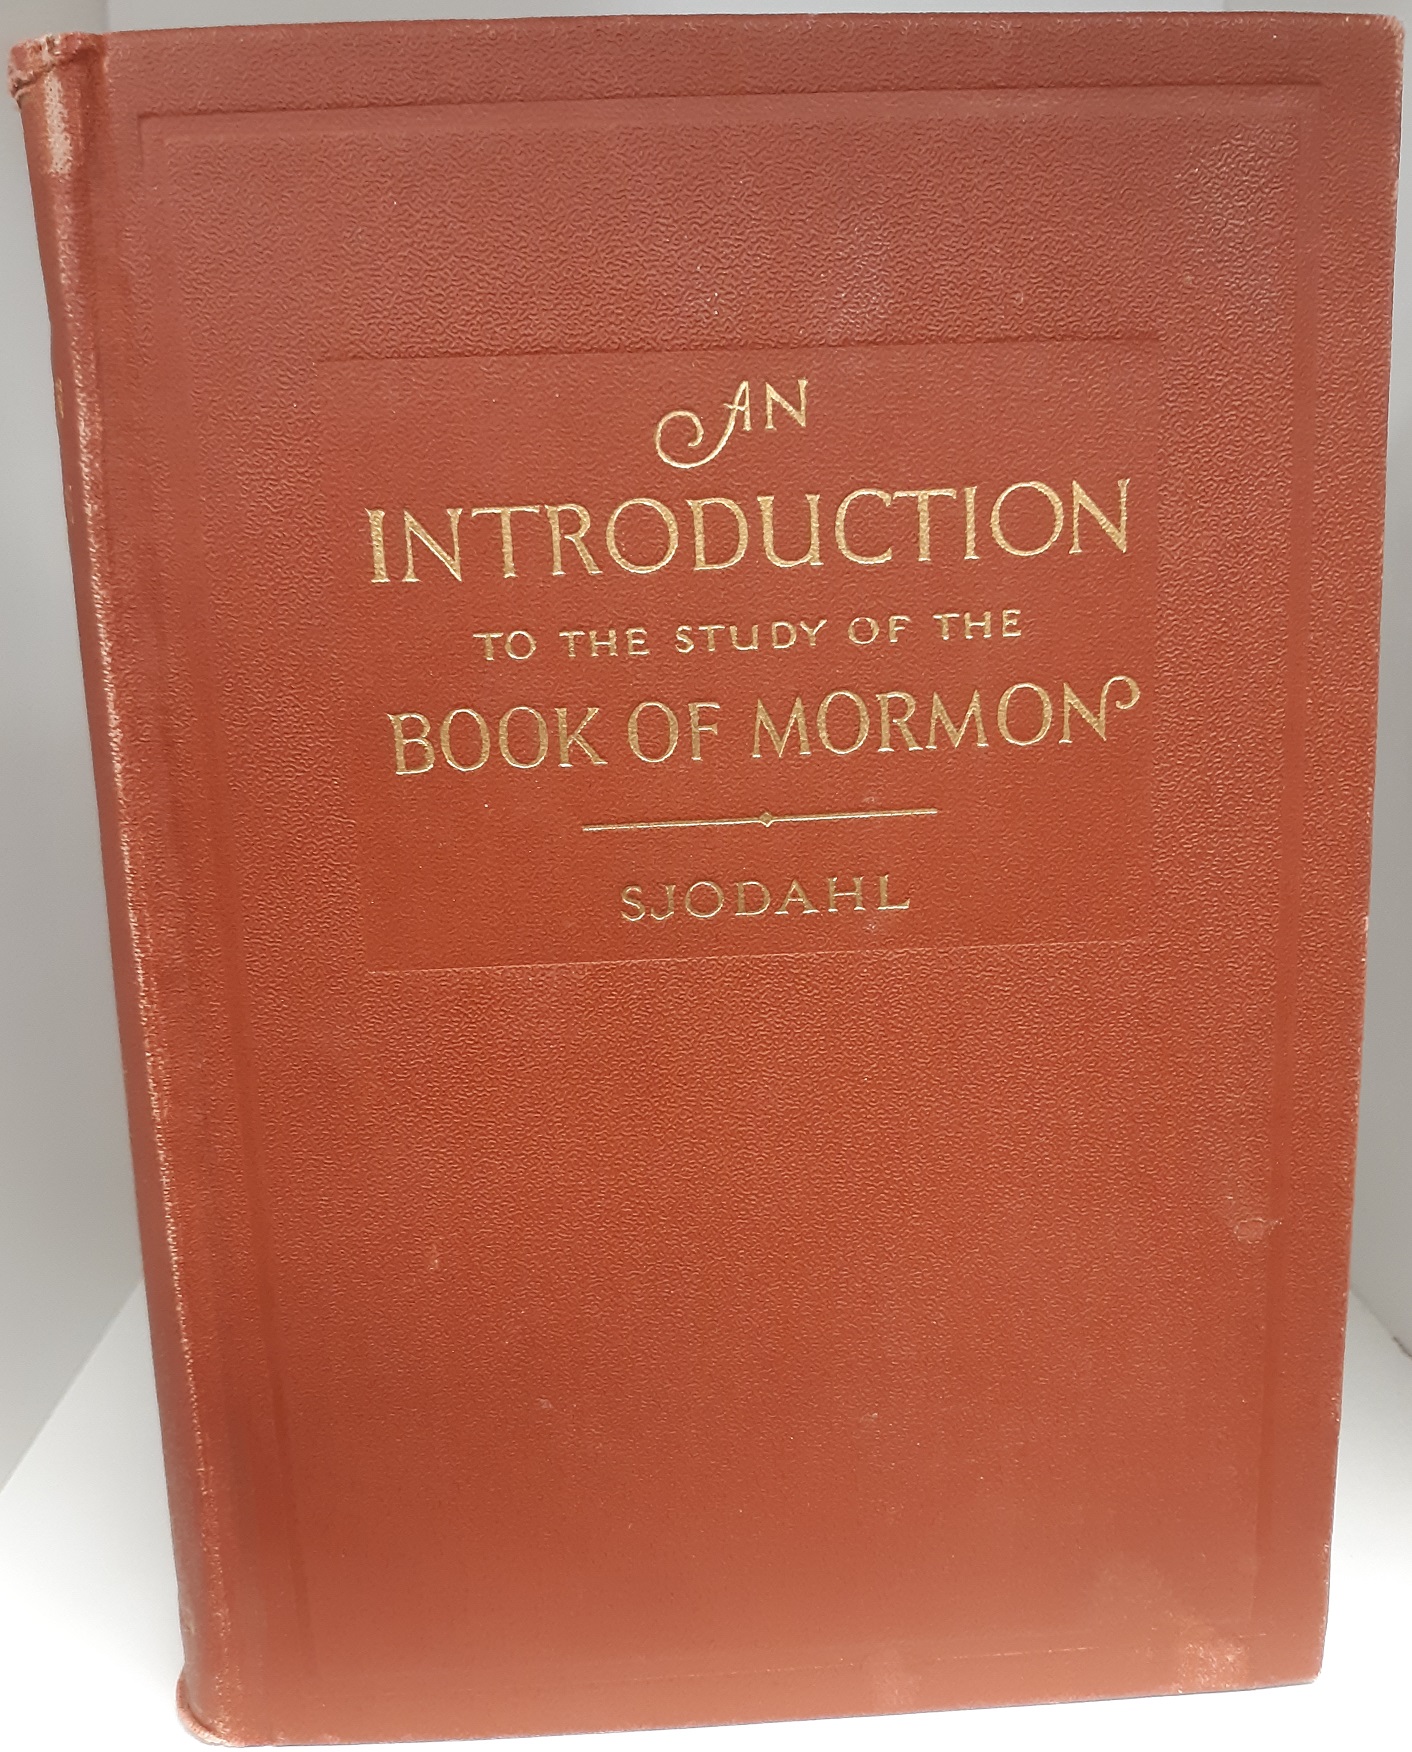 An Introduction to the Study of the Book of Mormon (1927) ~ by J. M. Sjodahl